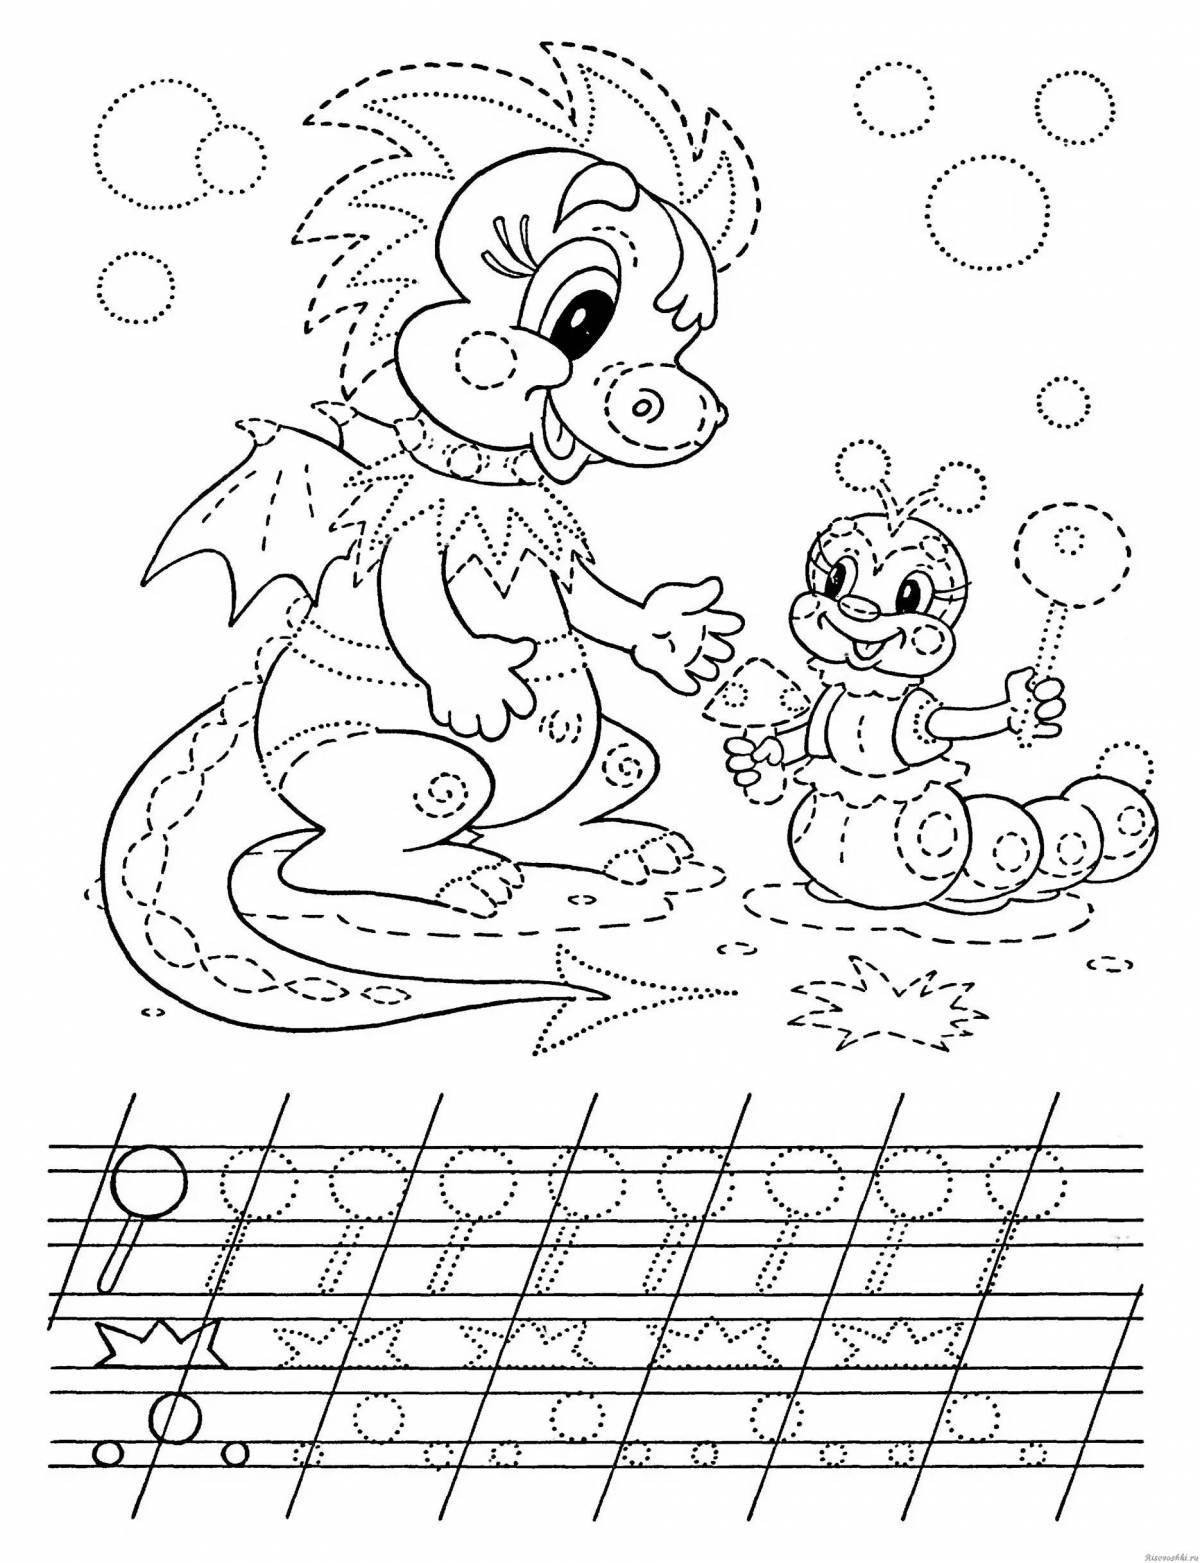 Adorable educational coloring book for girls 7 years old